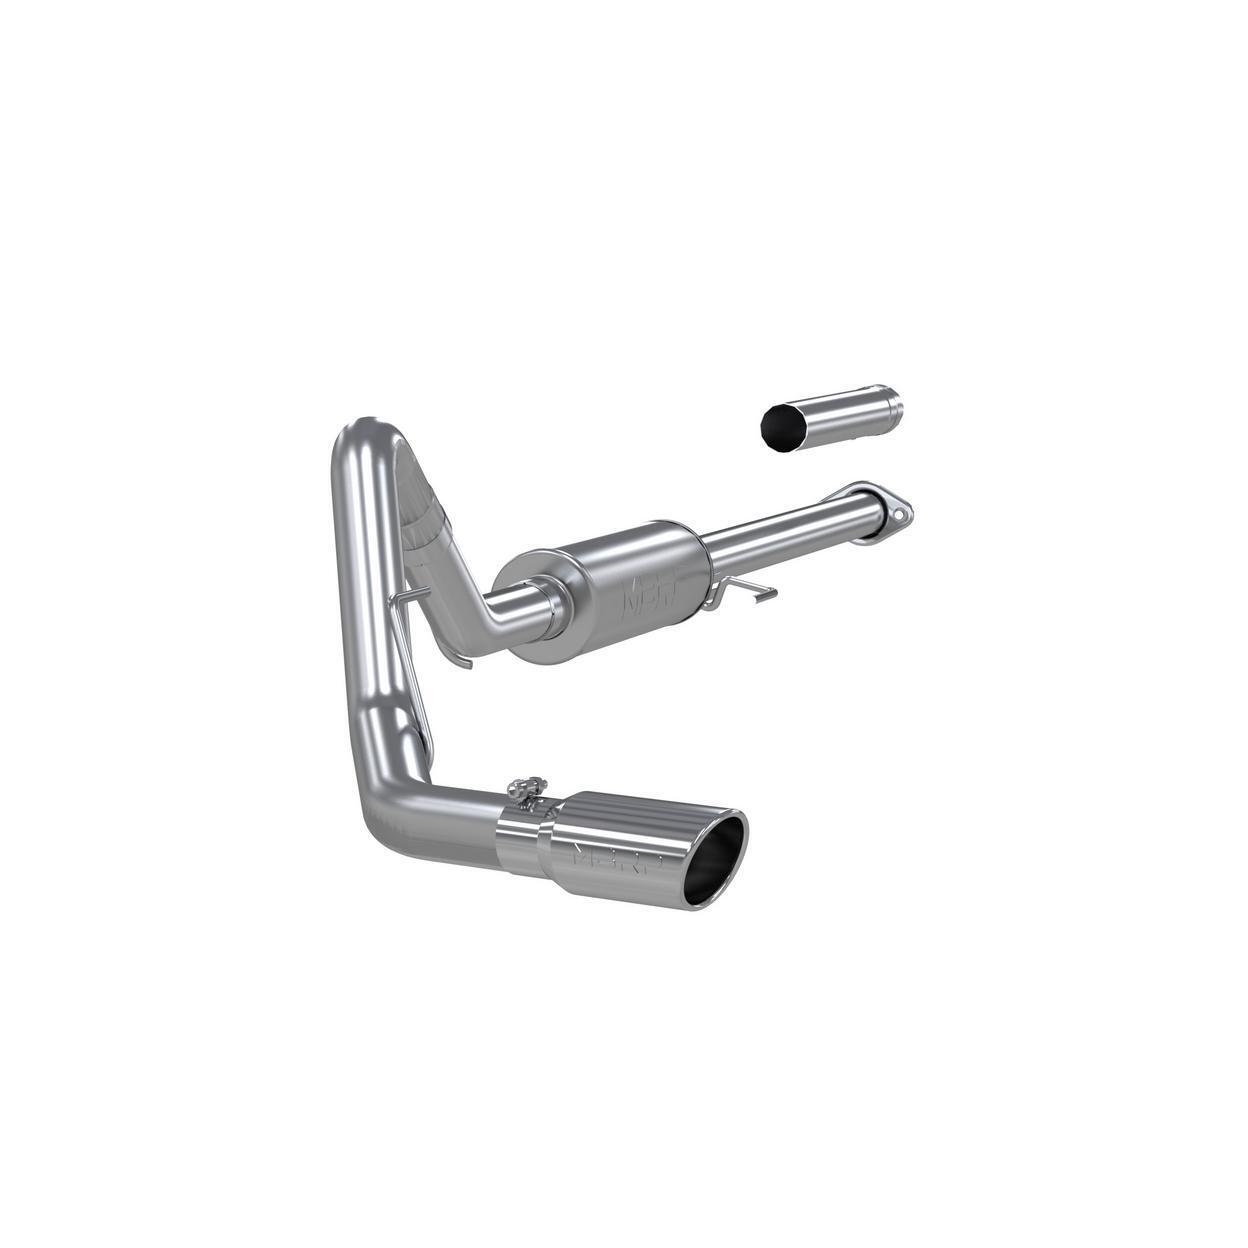 MBRP Exhaust System Kit for 2020 Ford F-150